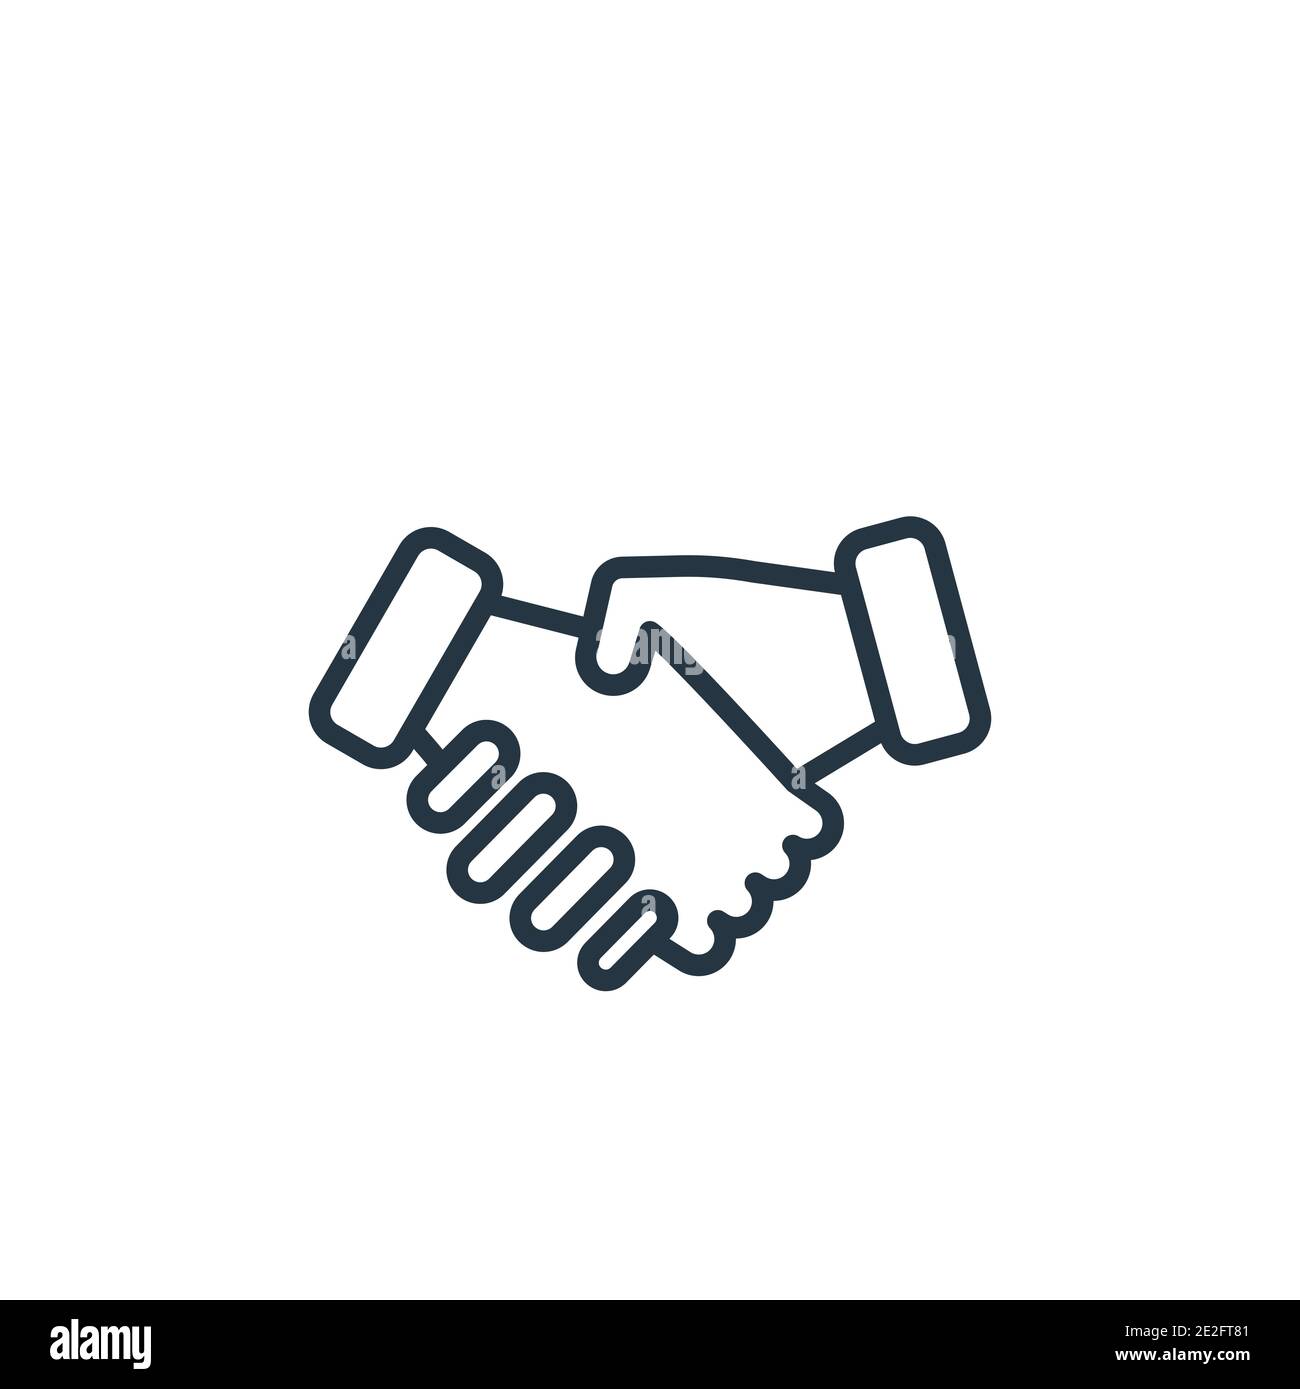 Premium Vector  Handshake isolated on blue background approval gesture  business concept of partnership cooperation successful deal hand shake  symbol vector 3d illustration